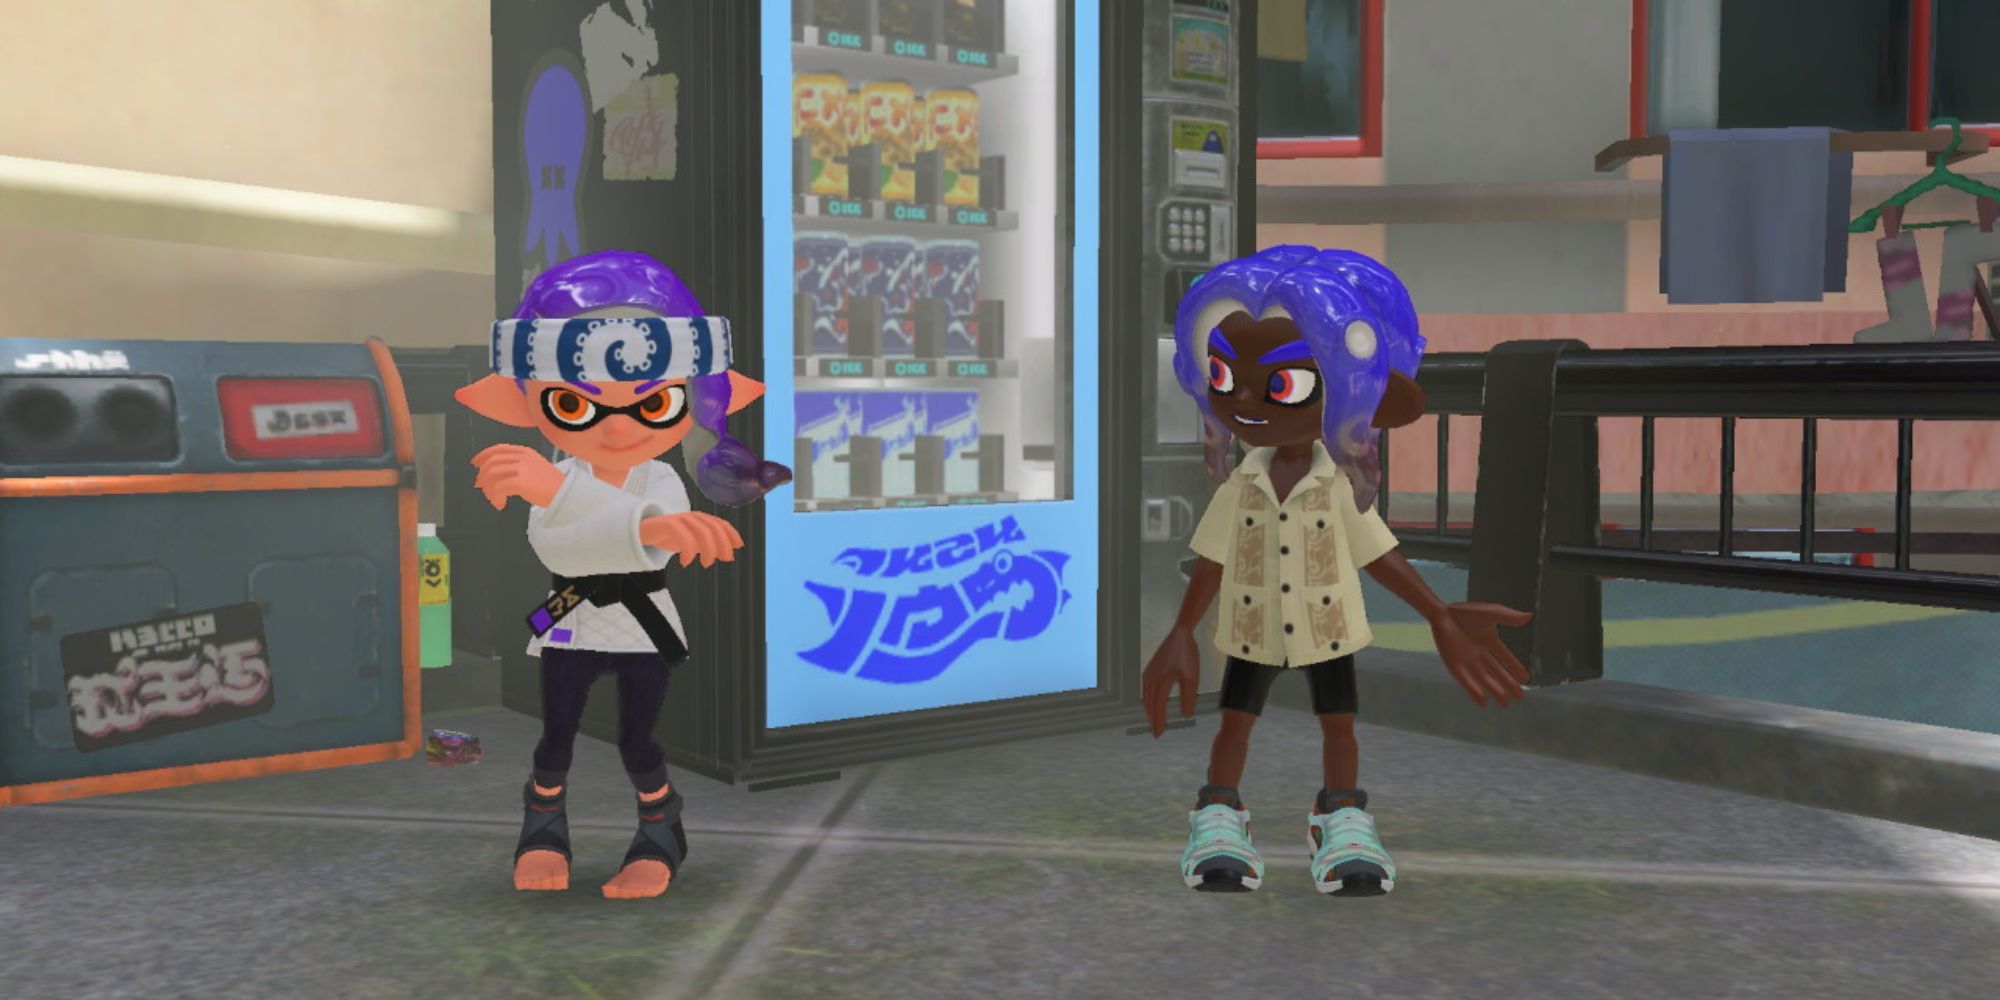 An Inkling wearing the Sous-Chef outfit stands beside an Octoling by a vending machine